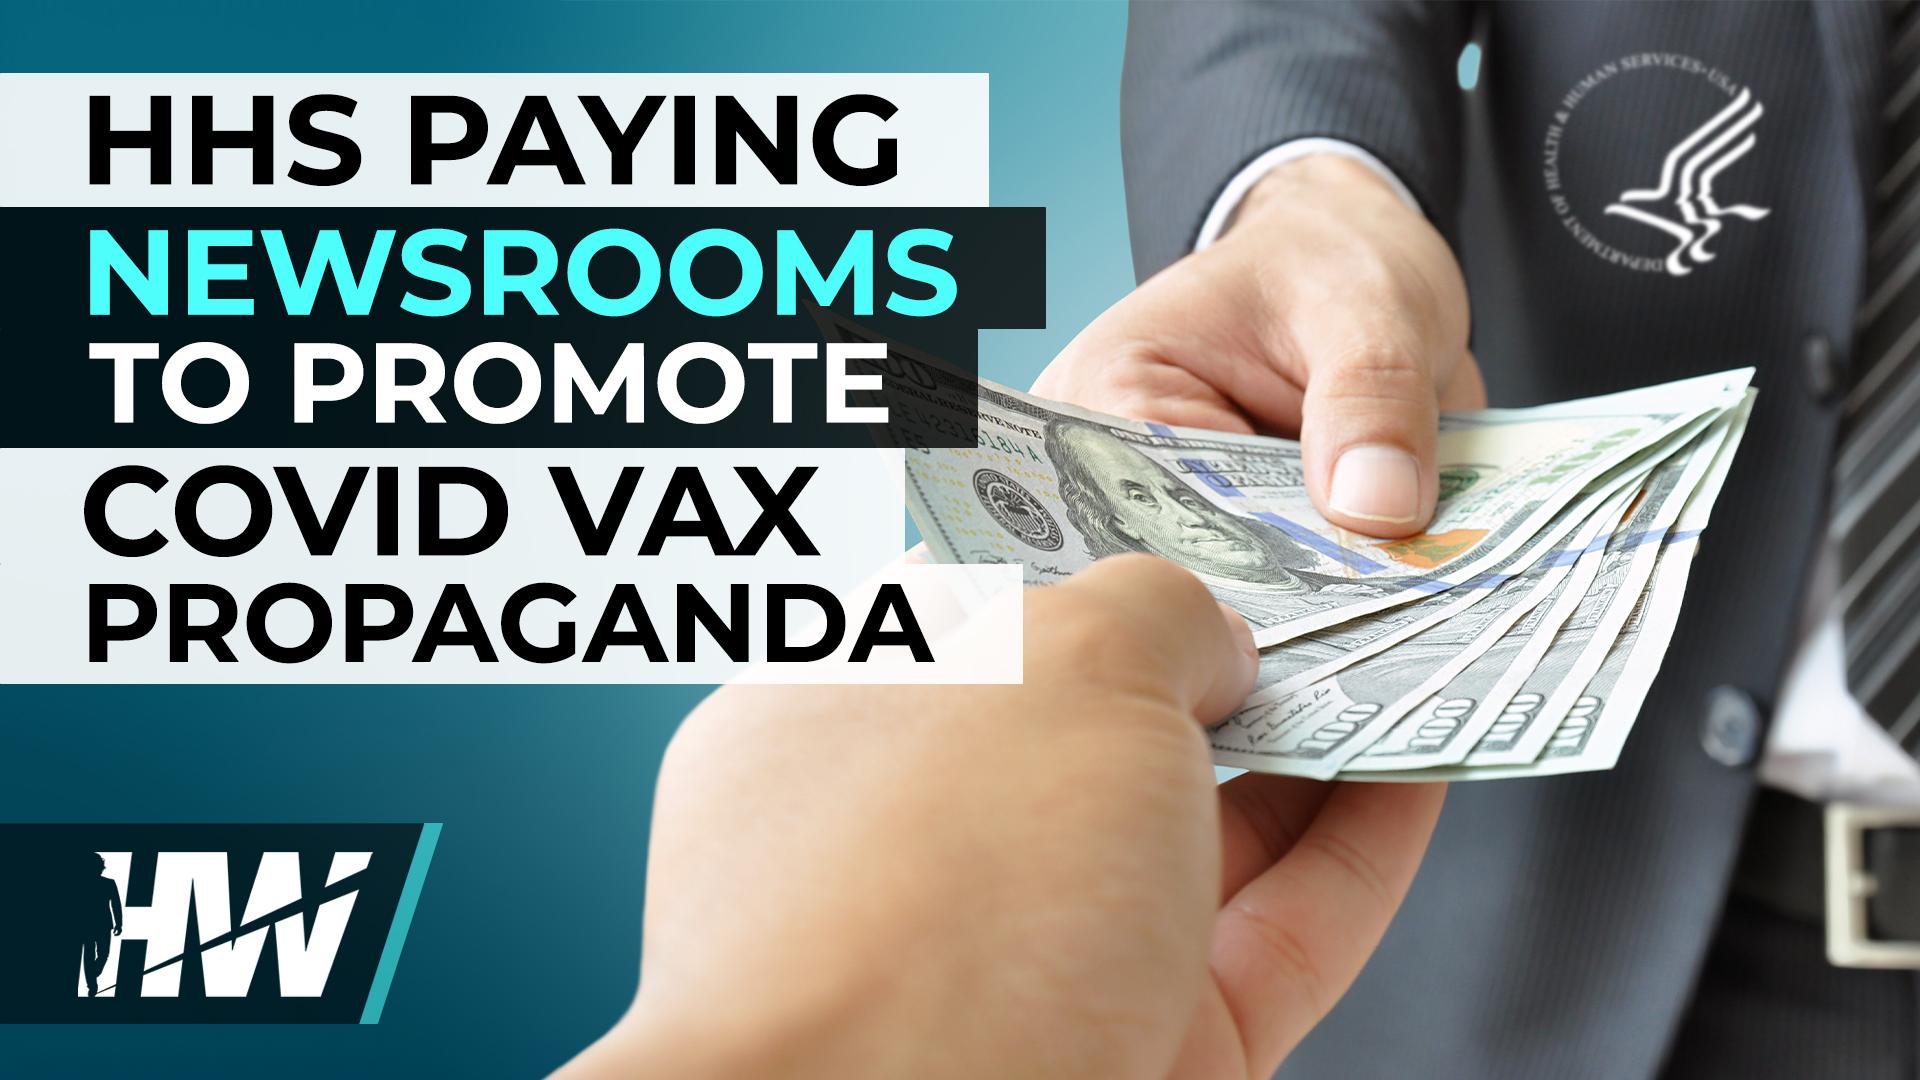 HHS PAYING NEWSROOMS TO PROMOTE COVID VAX PROPAGANDA